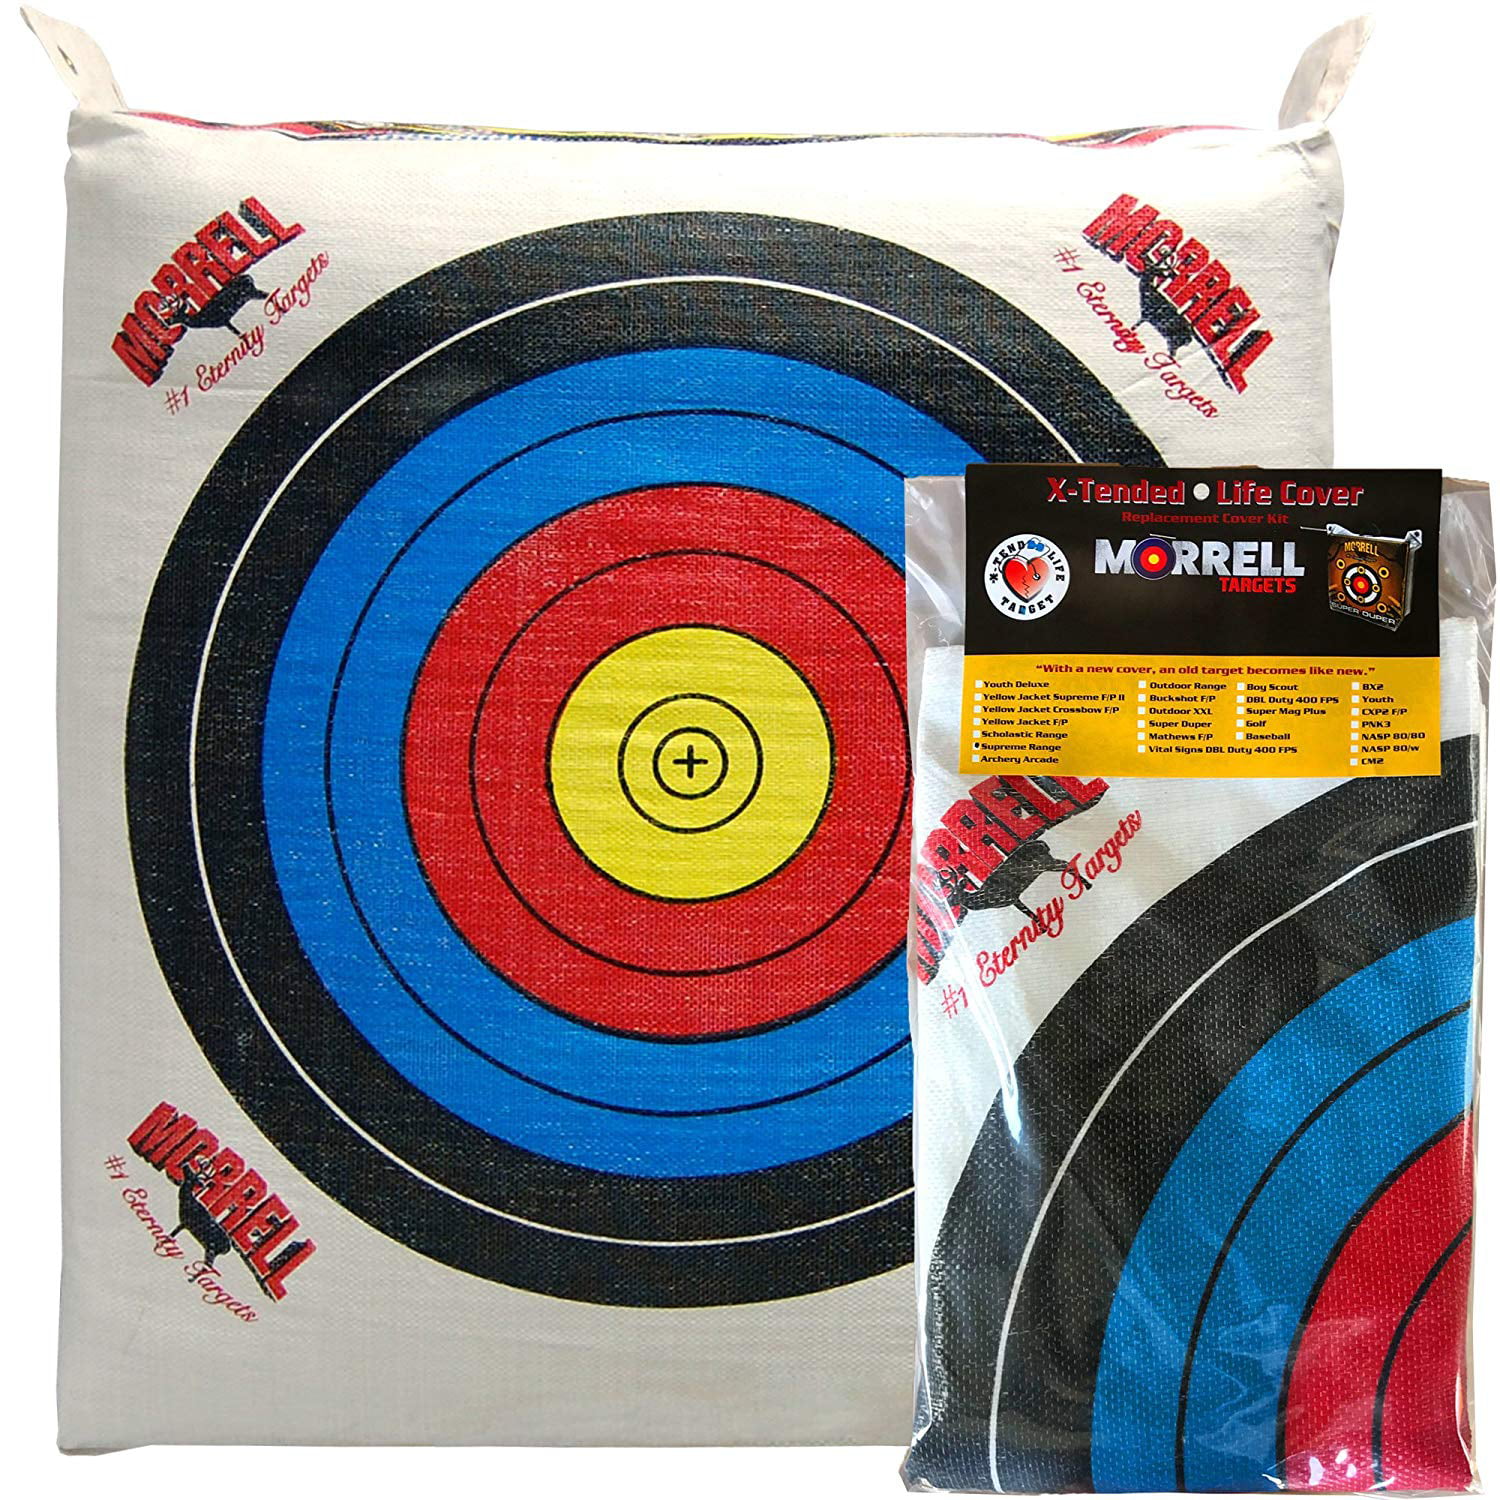 Details about   Morrell Outdoor Supreme Range NASP Adult Field Point Archery Bag Target 4 Pack 